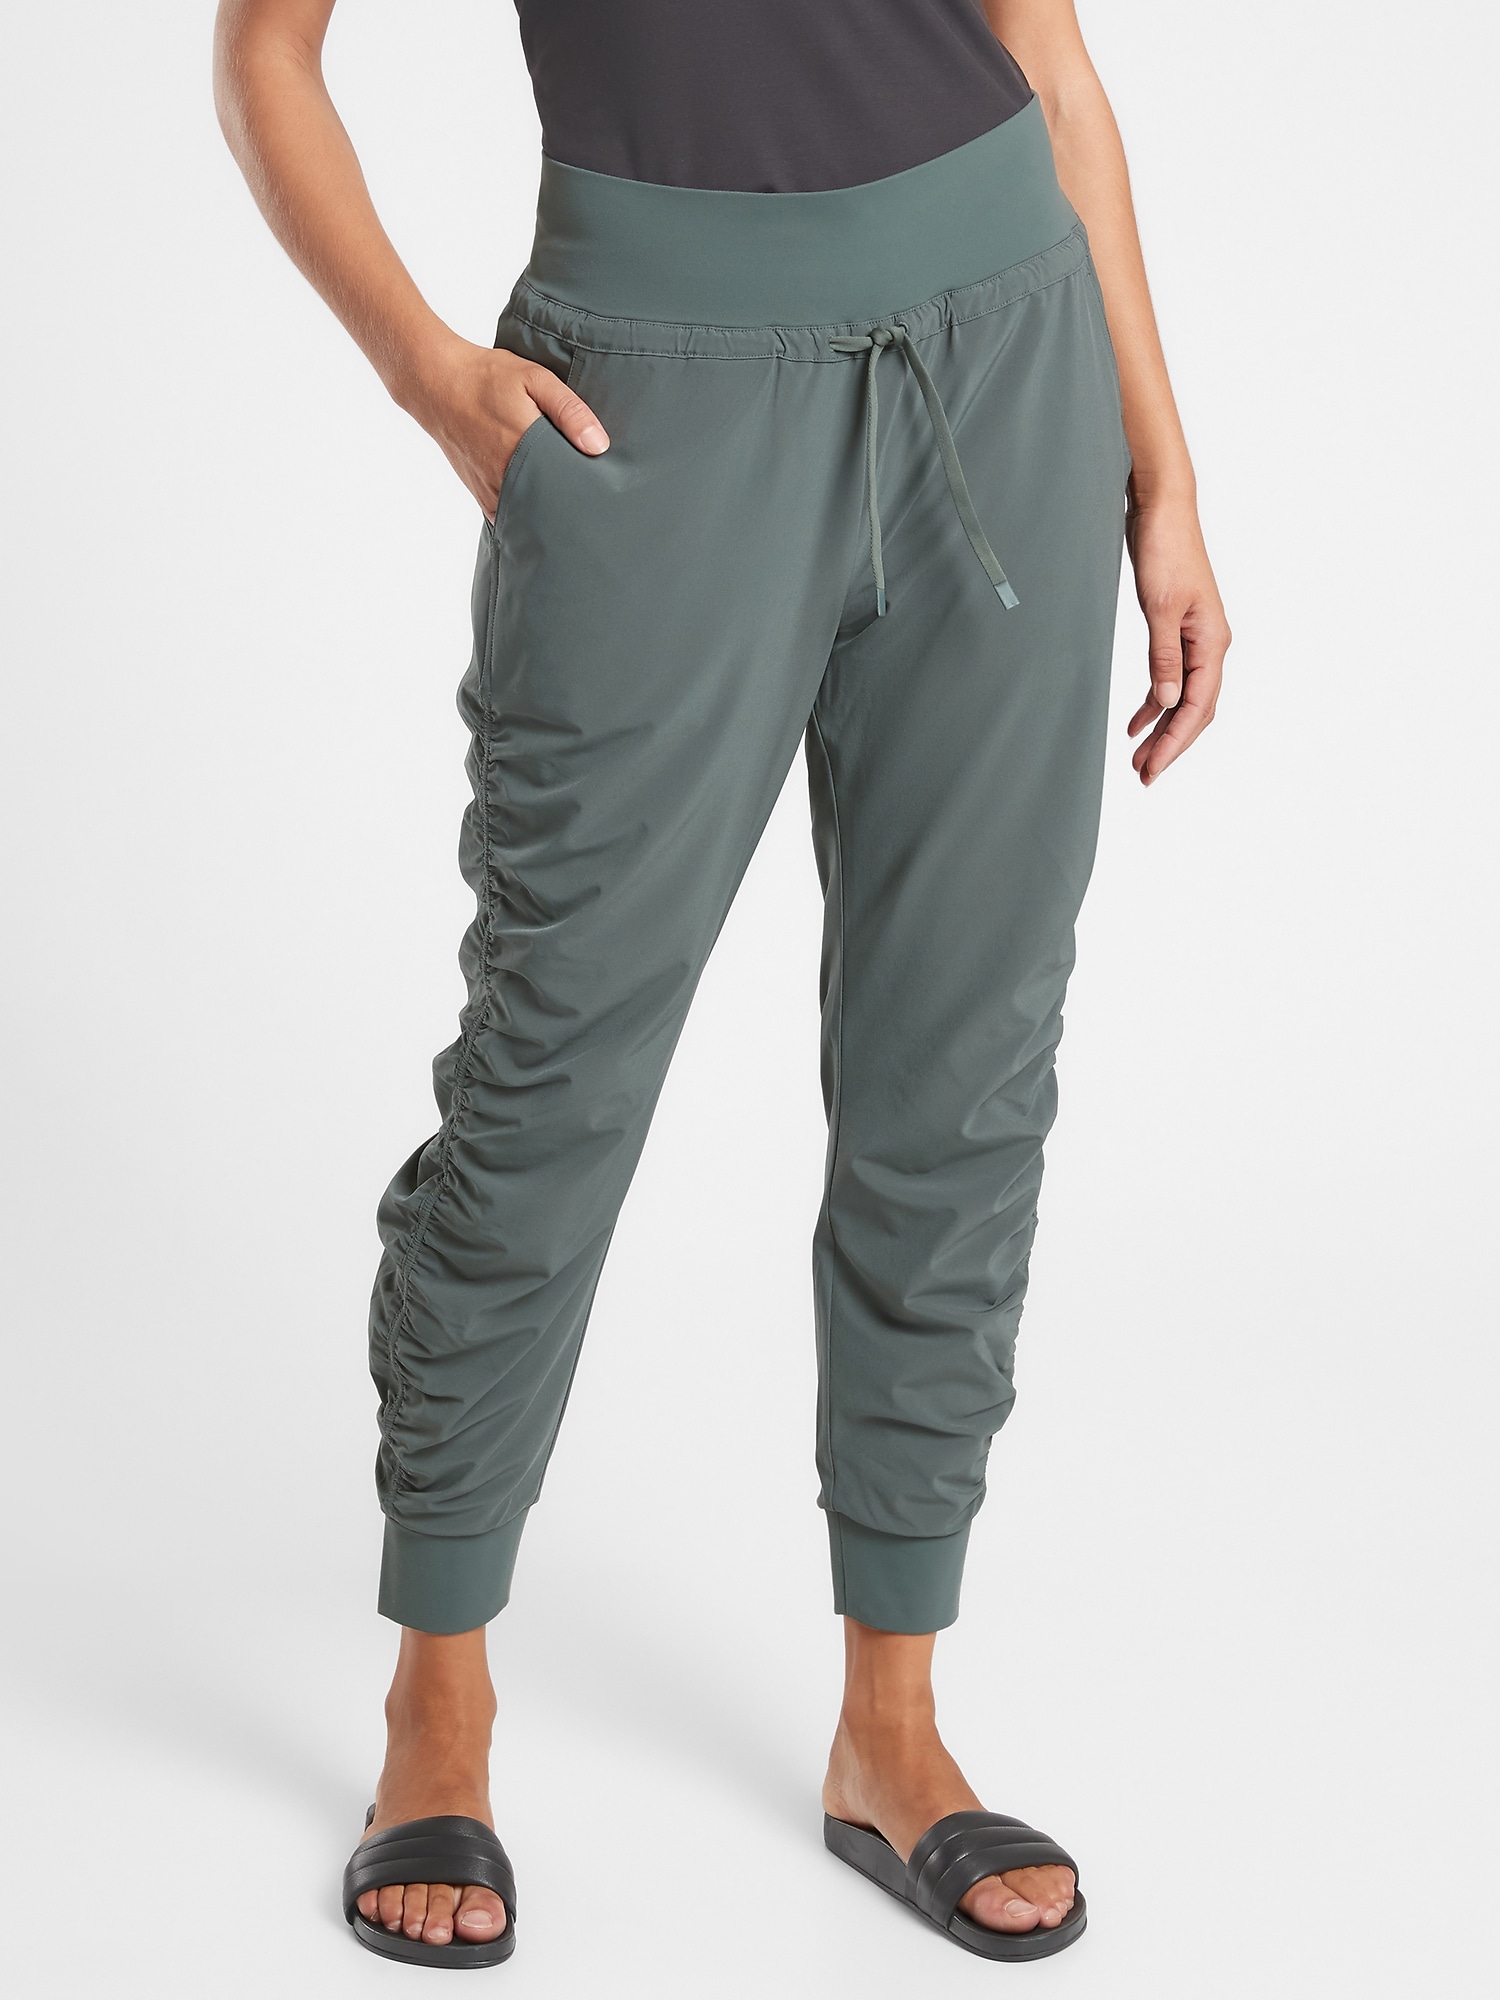 Attitude Lined Pant